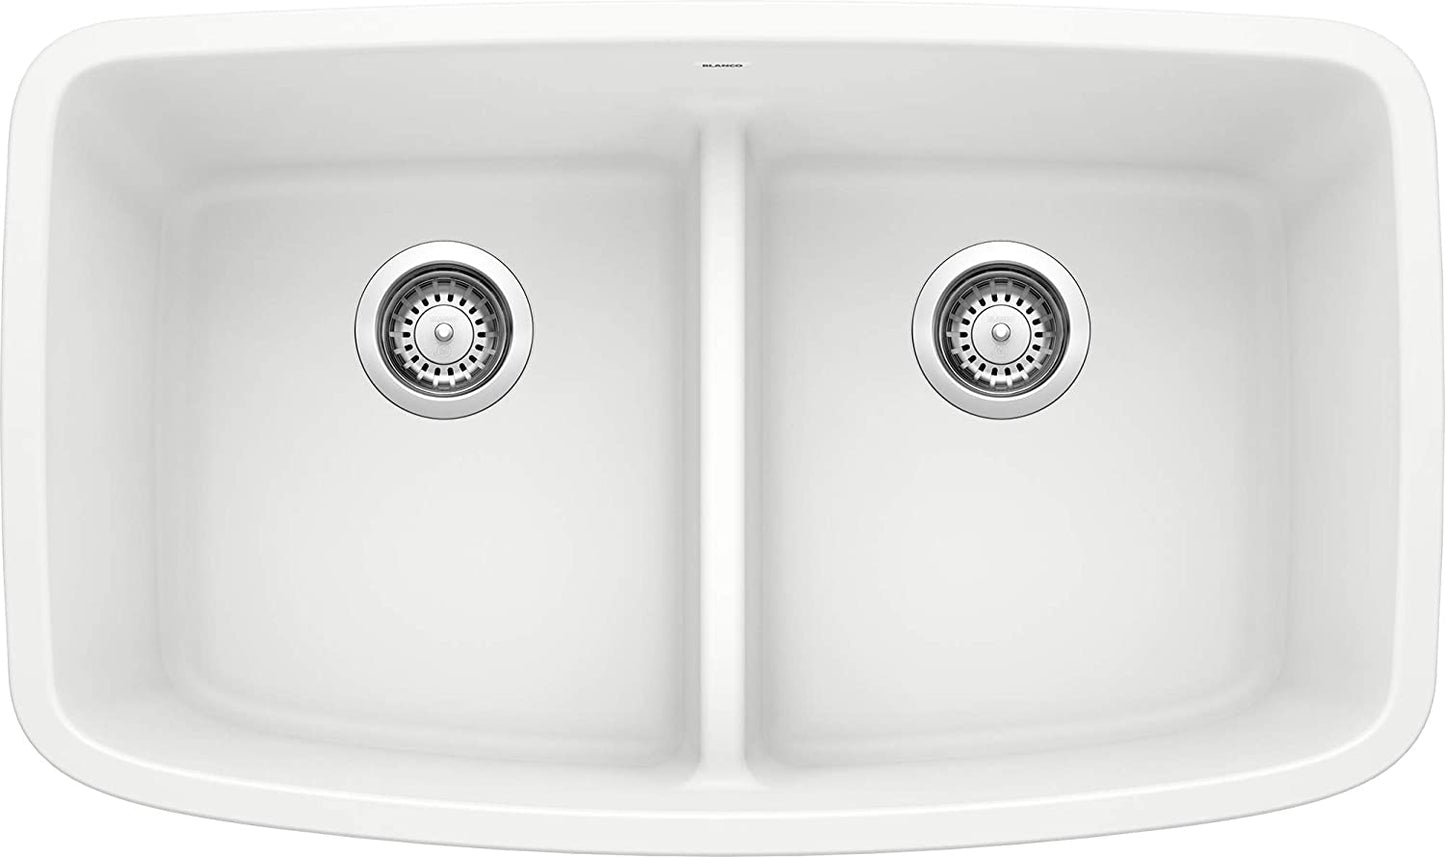 Valea Equal Double Bowl Undermount Kitchen Sink with Low Divide, 32" X 19" - White